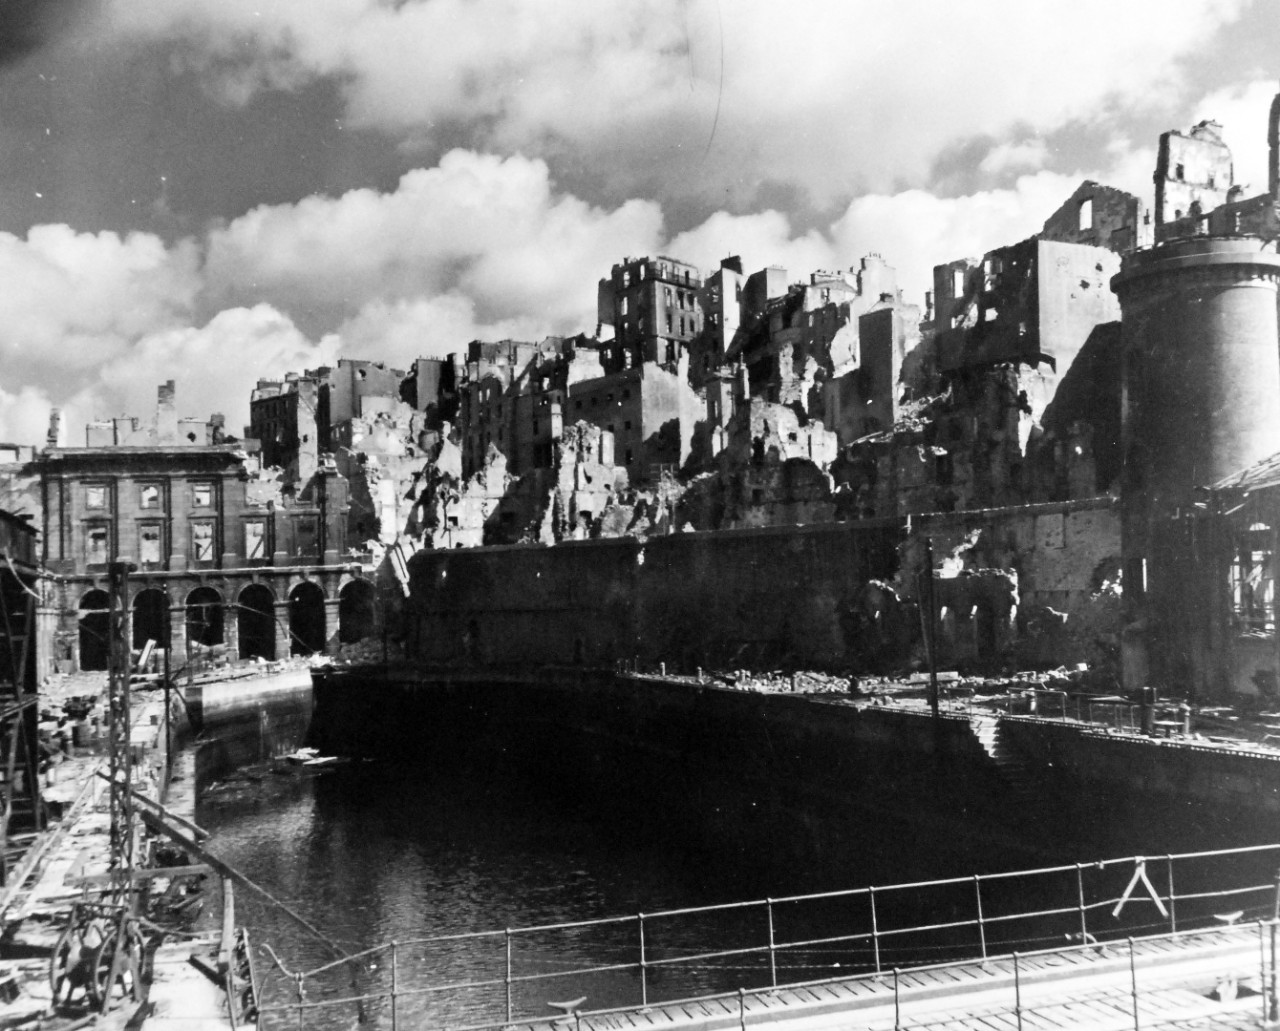 80-G-257410:   Invasion of Southern France, Brest, August-September 1944.   Allied Naval gunfire and aerial bombing of Brest, France, during the battle for the liberation of the city resulted in this devastation and wreckage.  Shown is the small section of the inner harbor, one of the dry docks where Germans once repaired their warships, 5 October 1944.  Official U.S. Navy Photograph, now in the collections of the National Archives.   (2014/10/28).